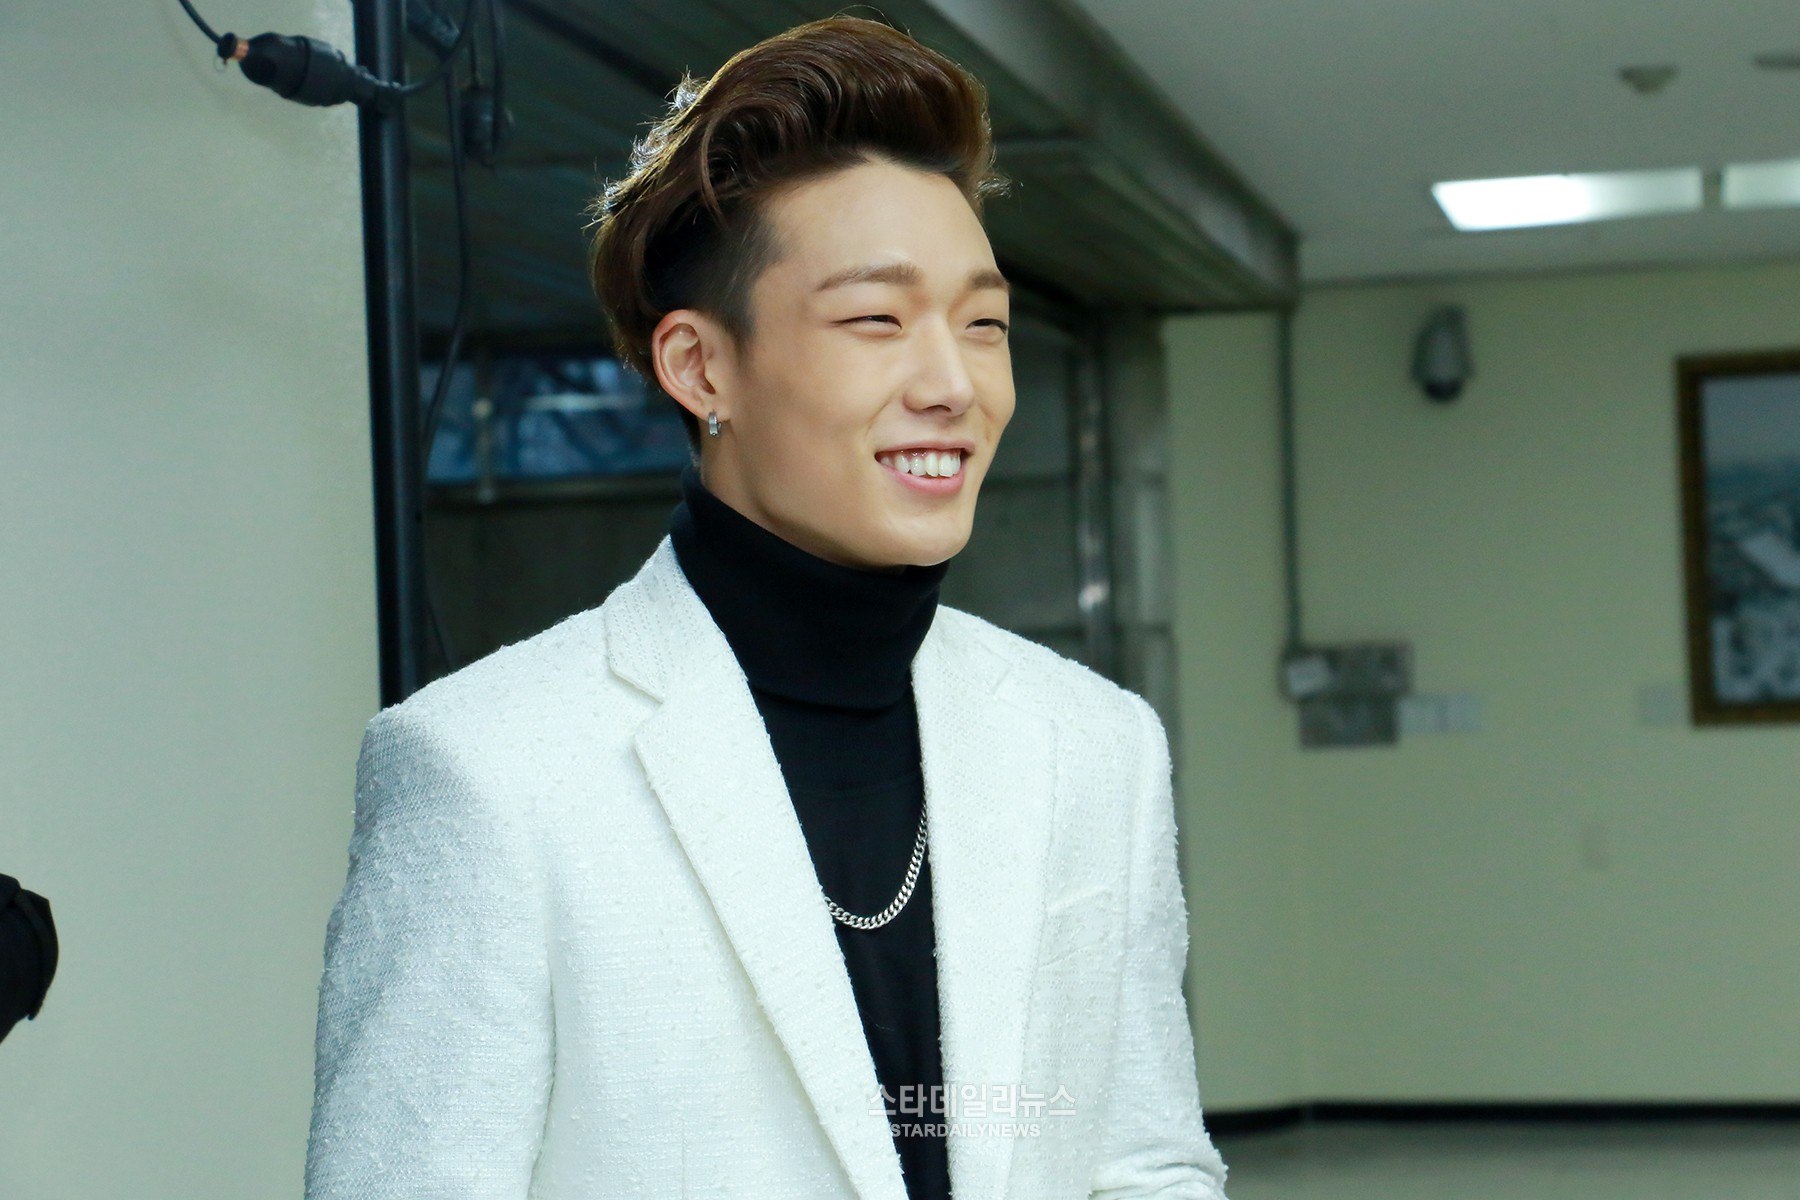 iKON Bobby Pre-Debut Life Completely Exposed By Past Social Media Posts - Koreaboo